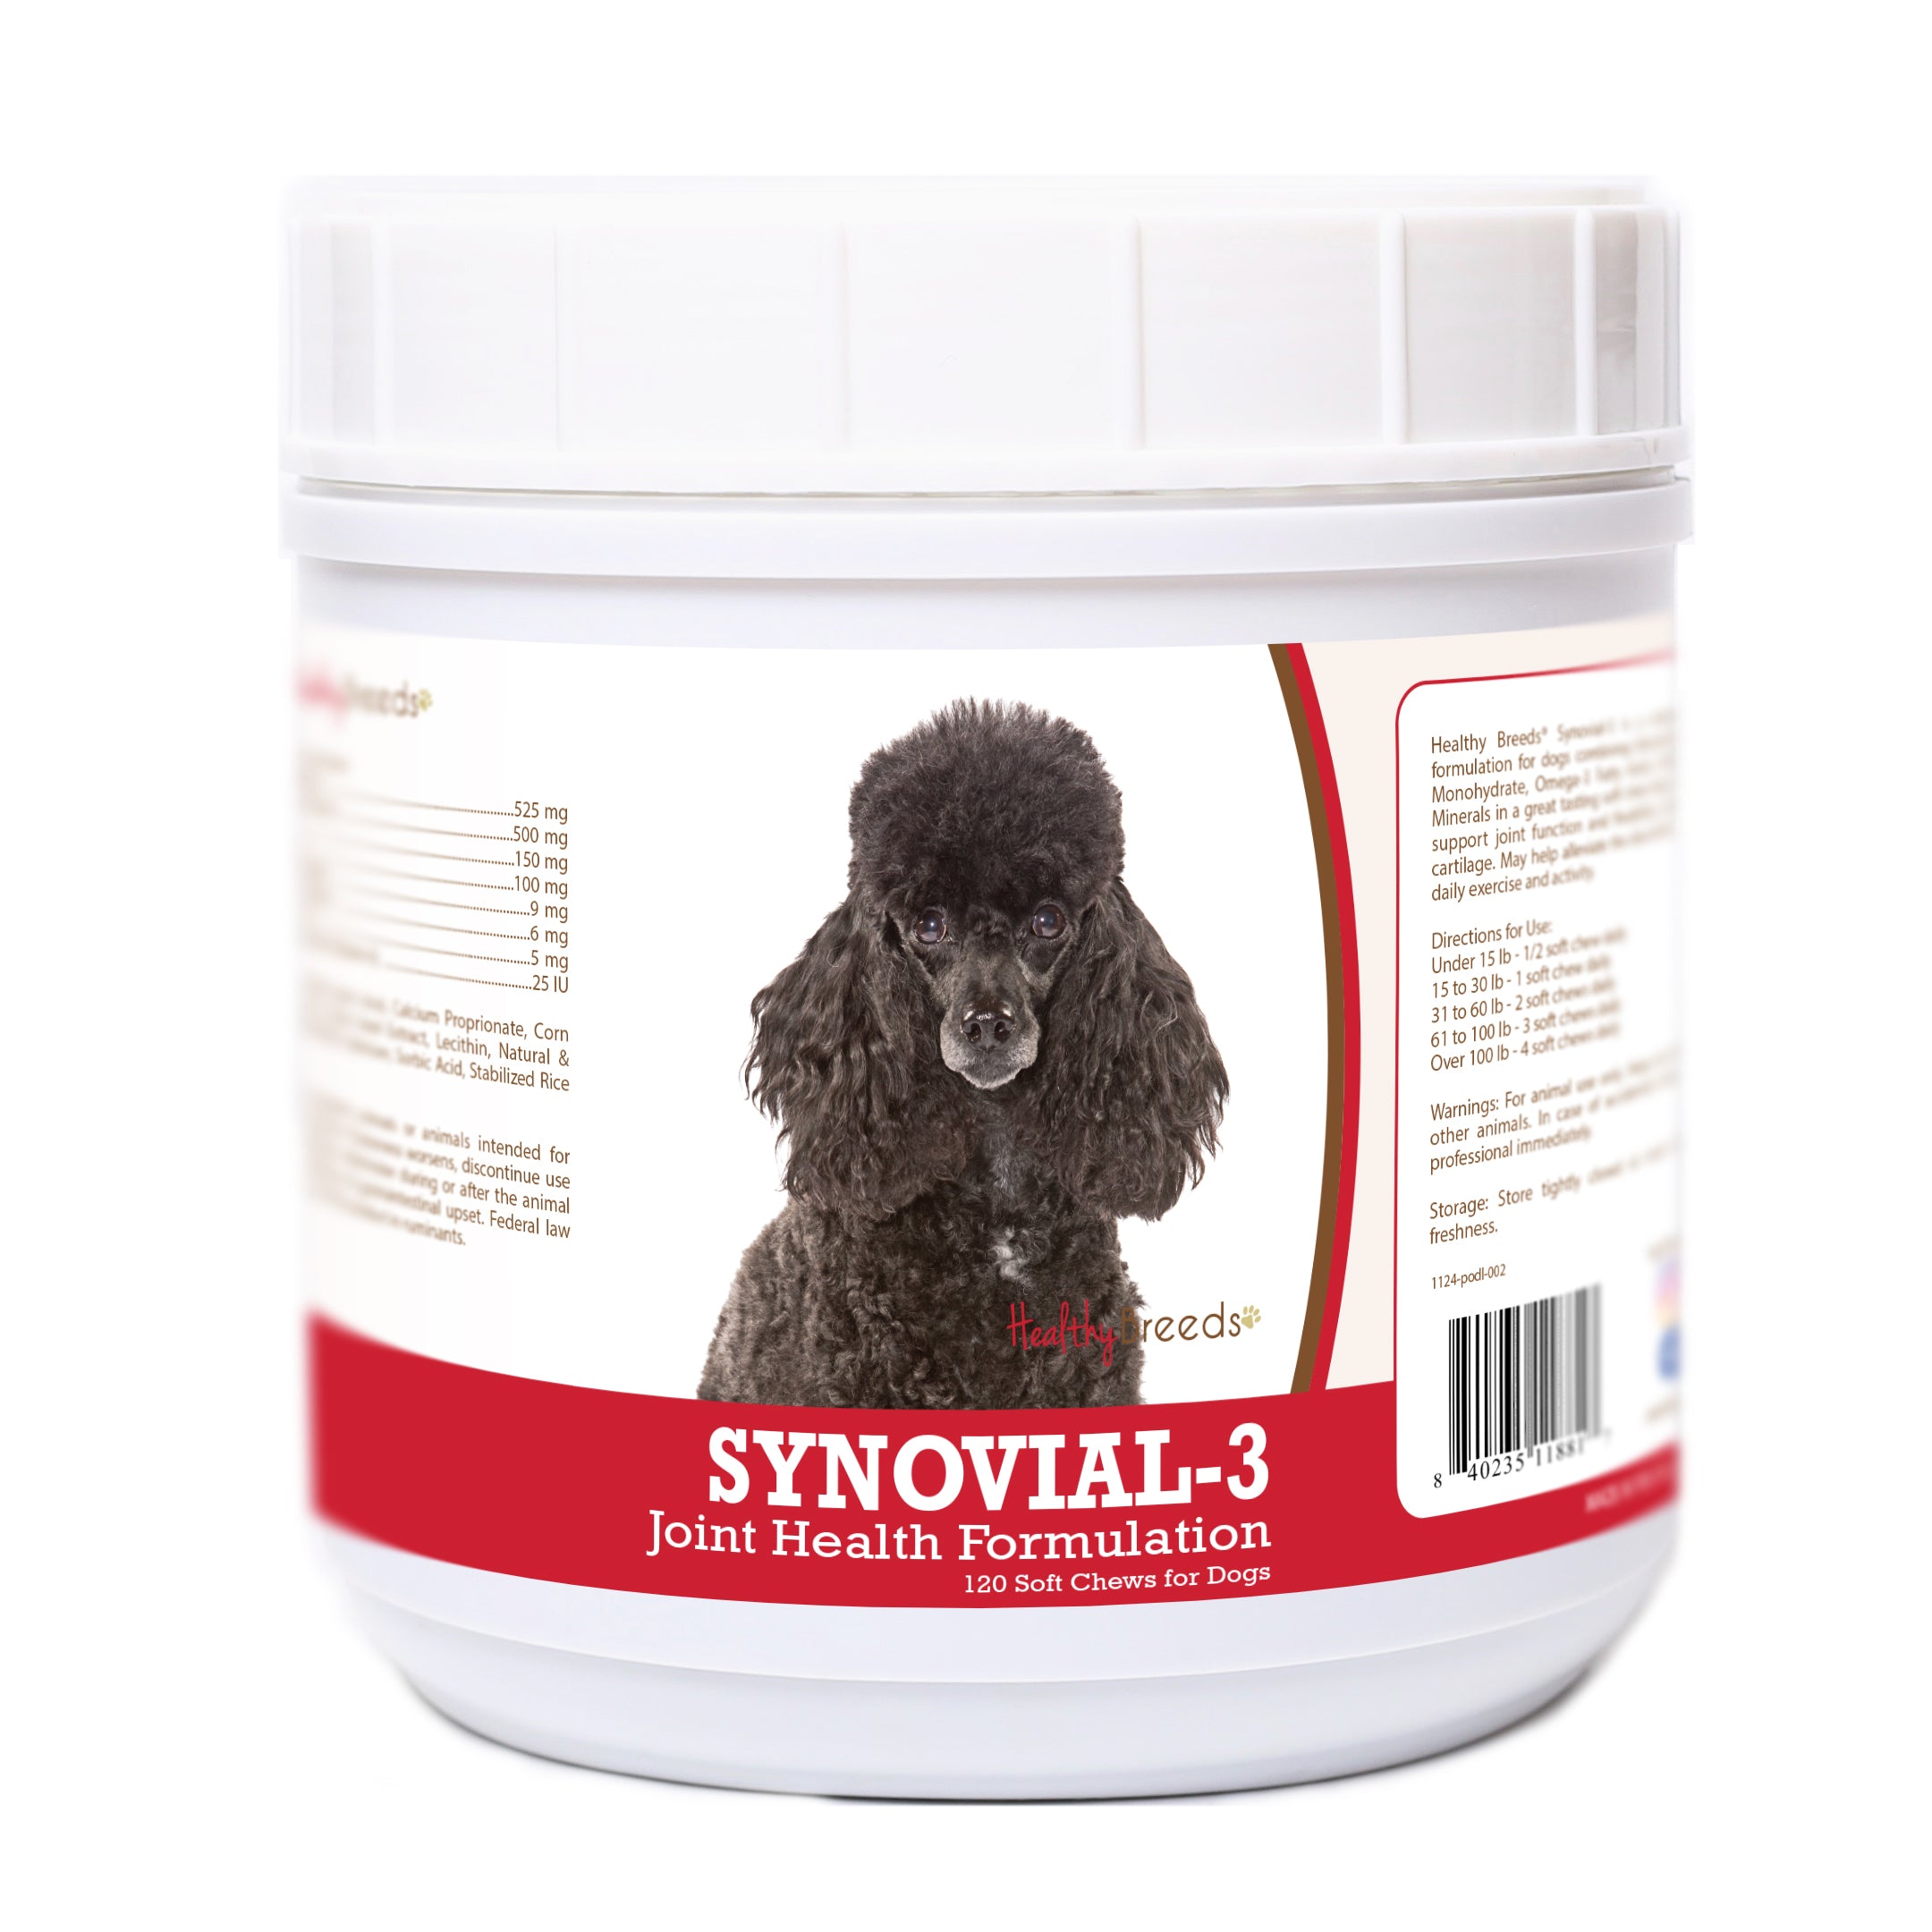 Poodle Synovial-3 Joint Health Formulation Soft Chews 120 Count